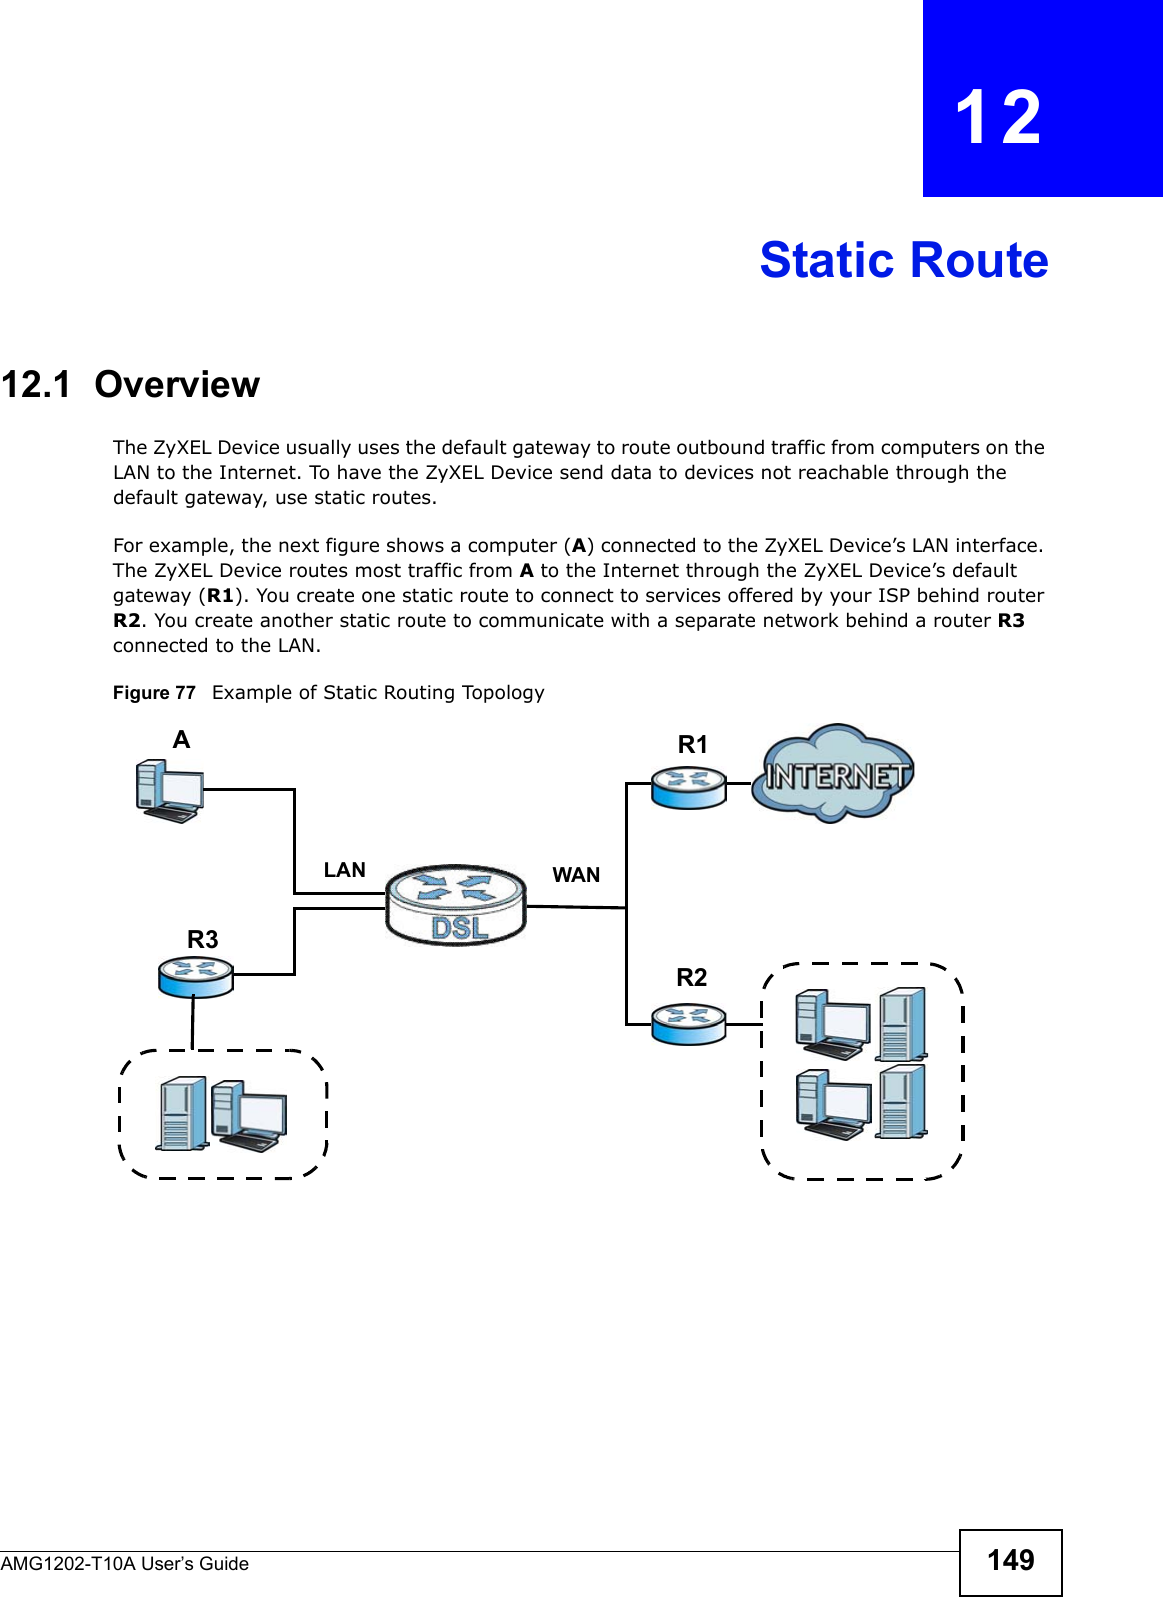 AMG1202-T10A User’s Guide 149CHAPTER   12Static Route12.1  Overview The ZyXEL Device usually uses the default gateway to route outbound traffic from computers on the LAN to the Internet. To have the ZyXEL Device send data to devices not reachable through the default gateway, use static routes.For example, the next figure shows a computer (A) connected to the ZyXEL Device’s LAN interface. The ZyXEL Device routes most traffic from A to the Internet through the ZyXEL Device’s default gateway (R1). You create one static route to connect to services offered by your ISP behind router R2. You create another static route to communicate with a separate network behind a router R3 connected to the LAN.   Figure 77   Example of Static Routing TopologyWANR1R2AR3LAN